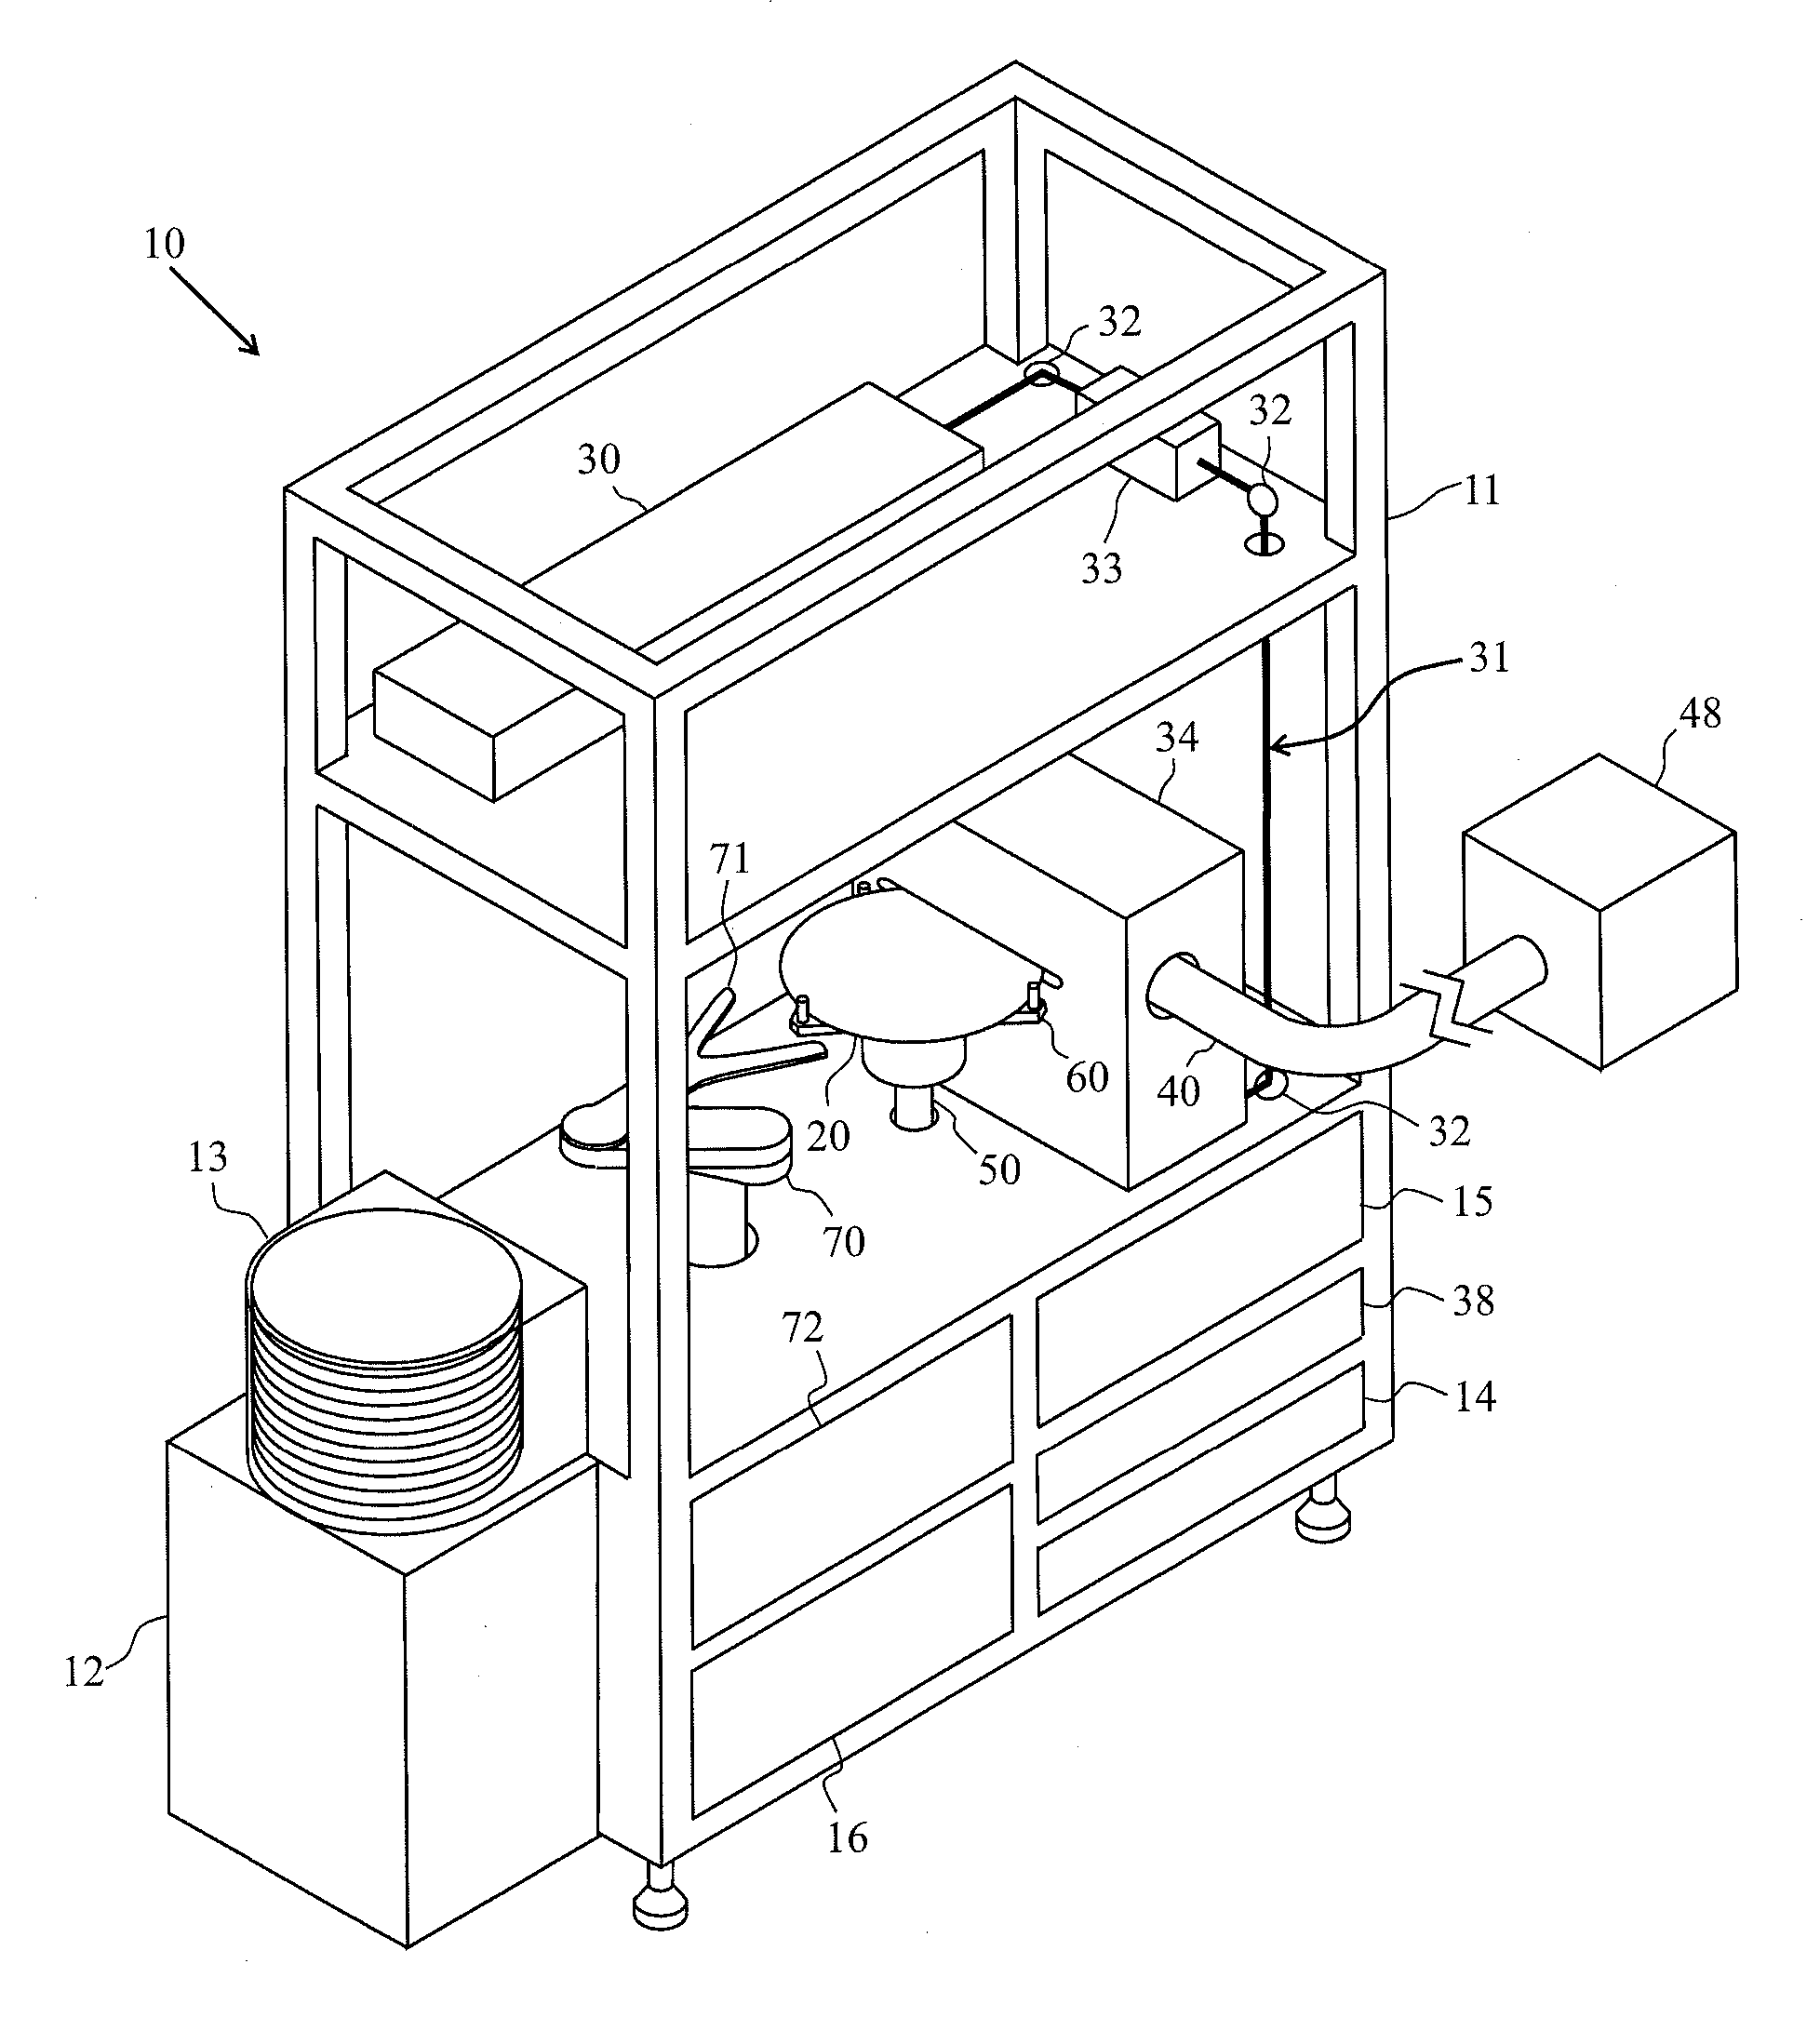 Method and apparatus for processing substrate edges